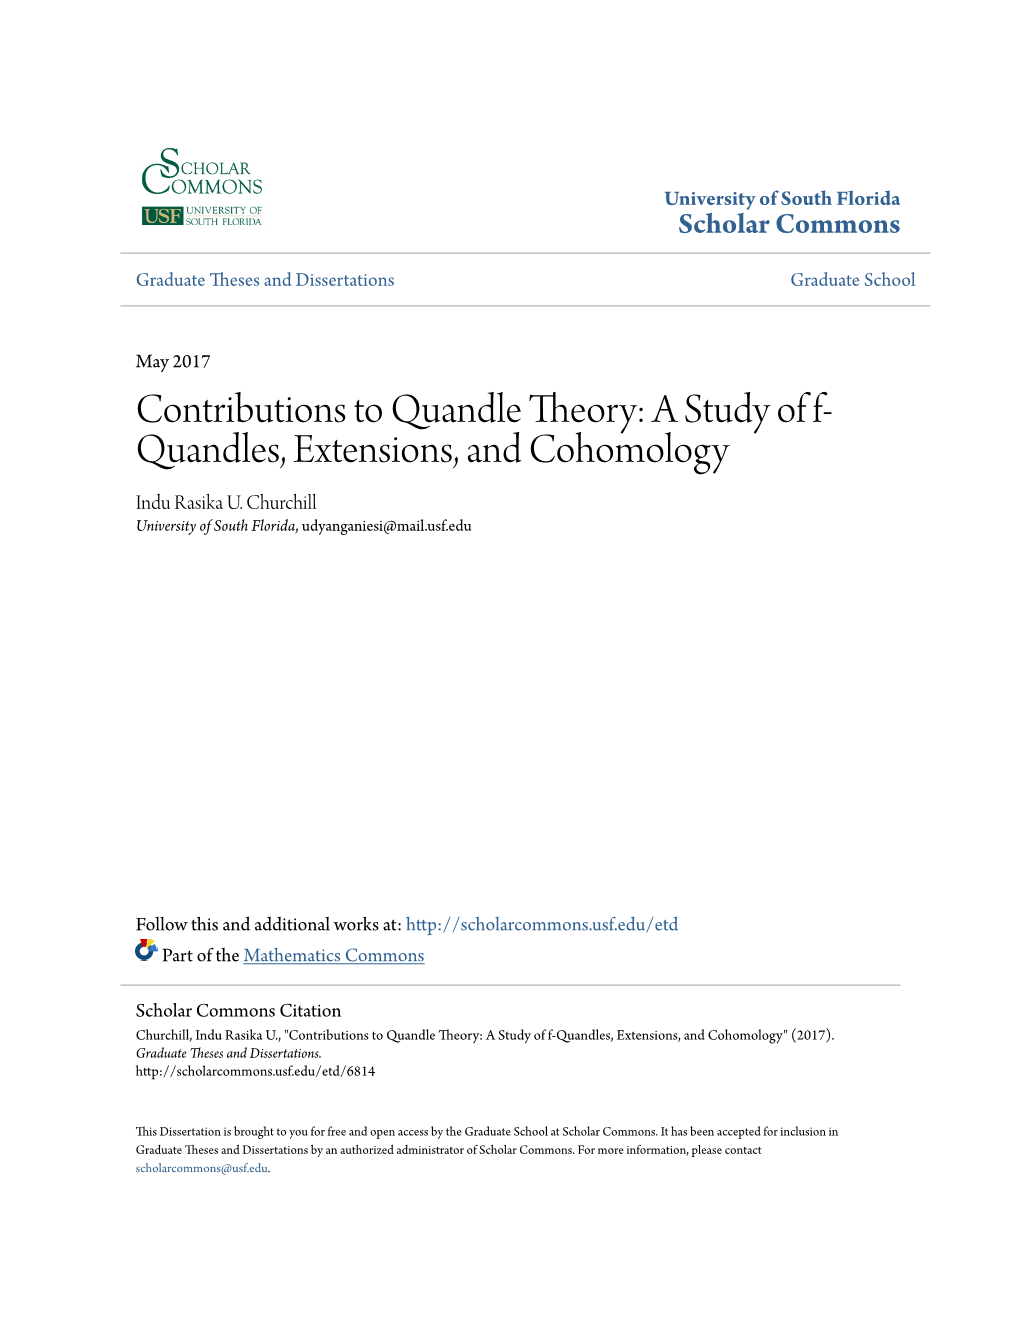 Contributions to Quandle Theory: a Study of F-Quandles, Extensions, and Cohomology" (2017)